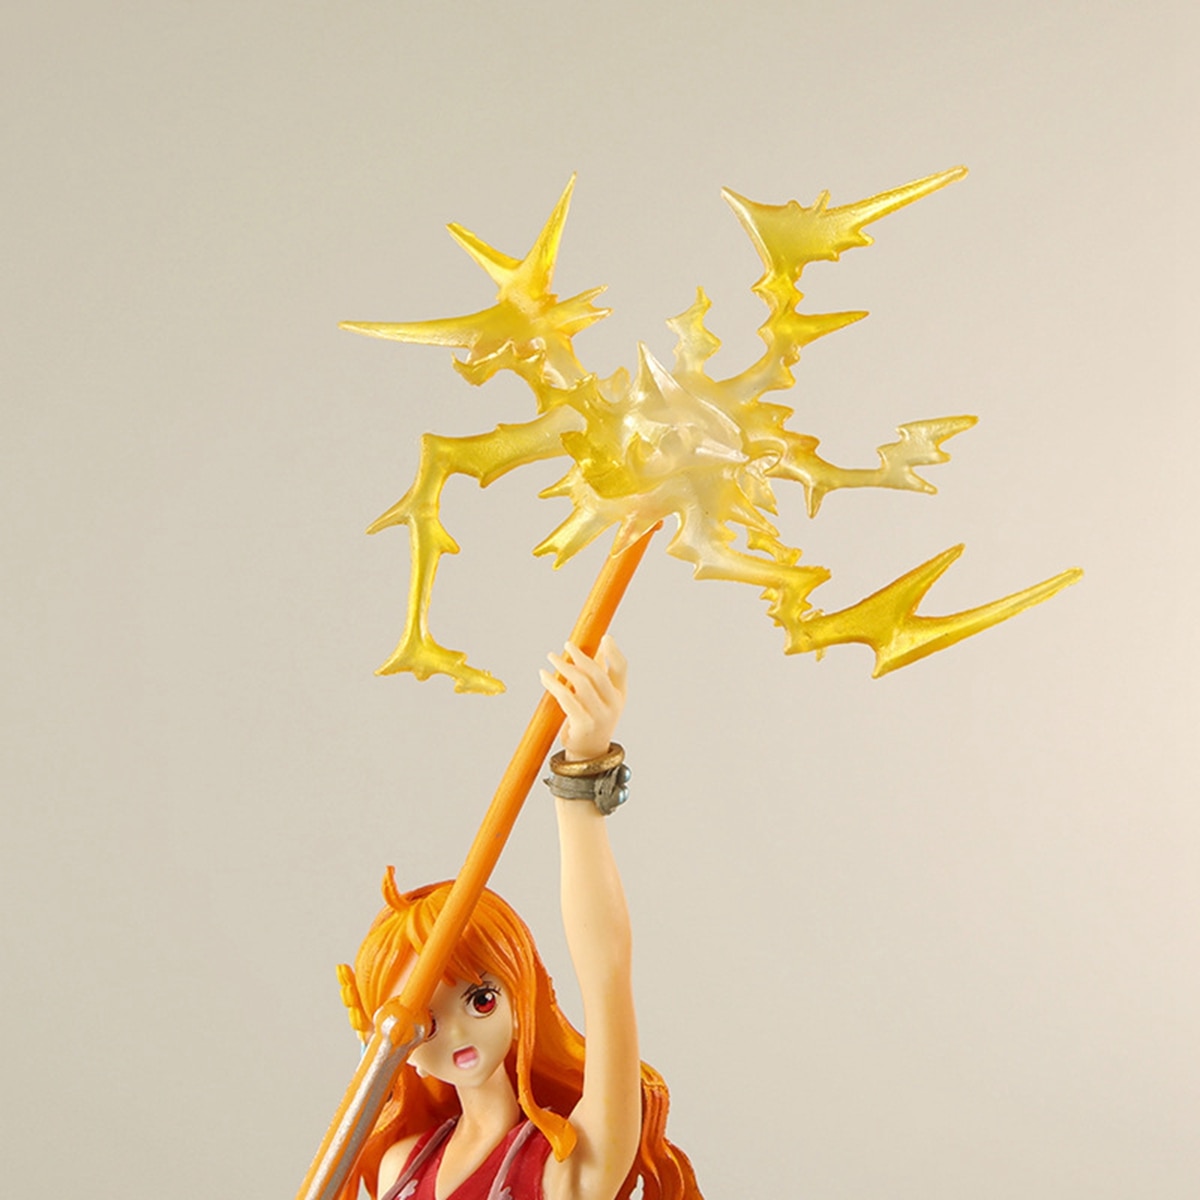 Anime One Piece Nami Figure Diva Stick Model Toy Gift Collection 23CM Luffy Action Figure Collection 1 - One Piece Store